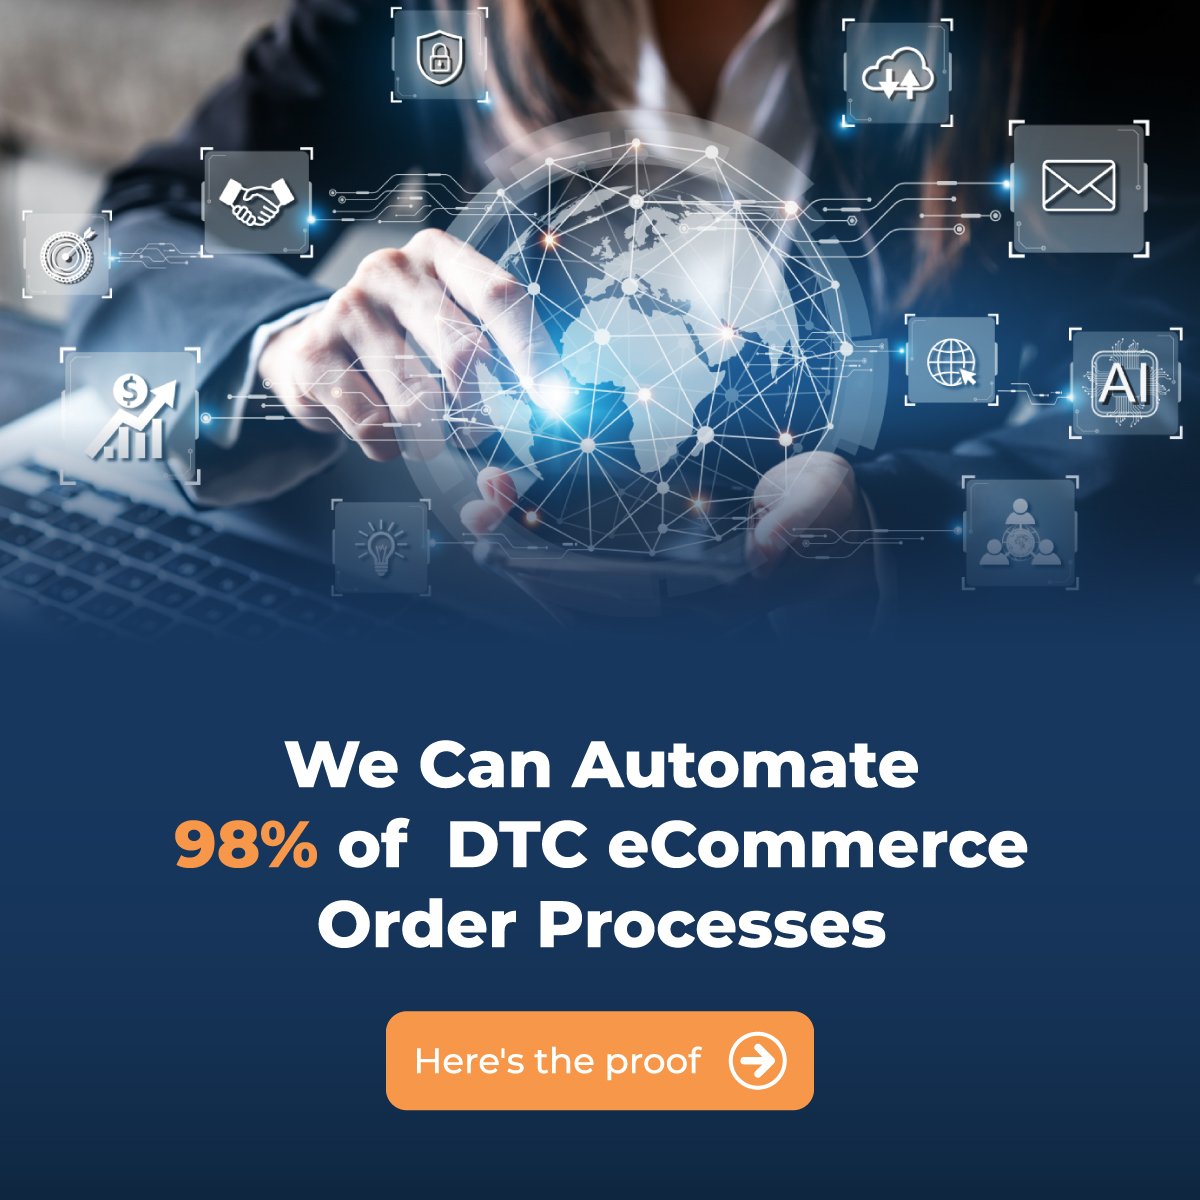 Order Processes Automation Case Study